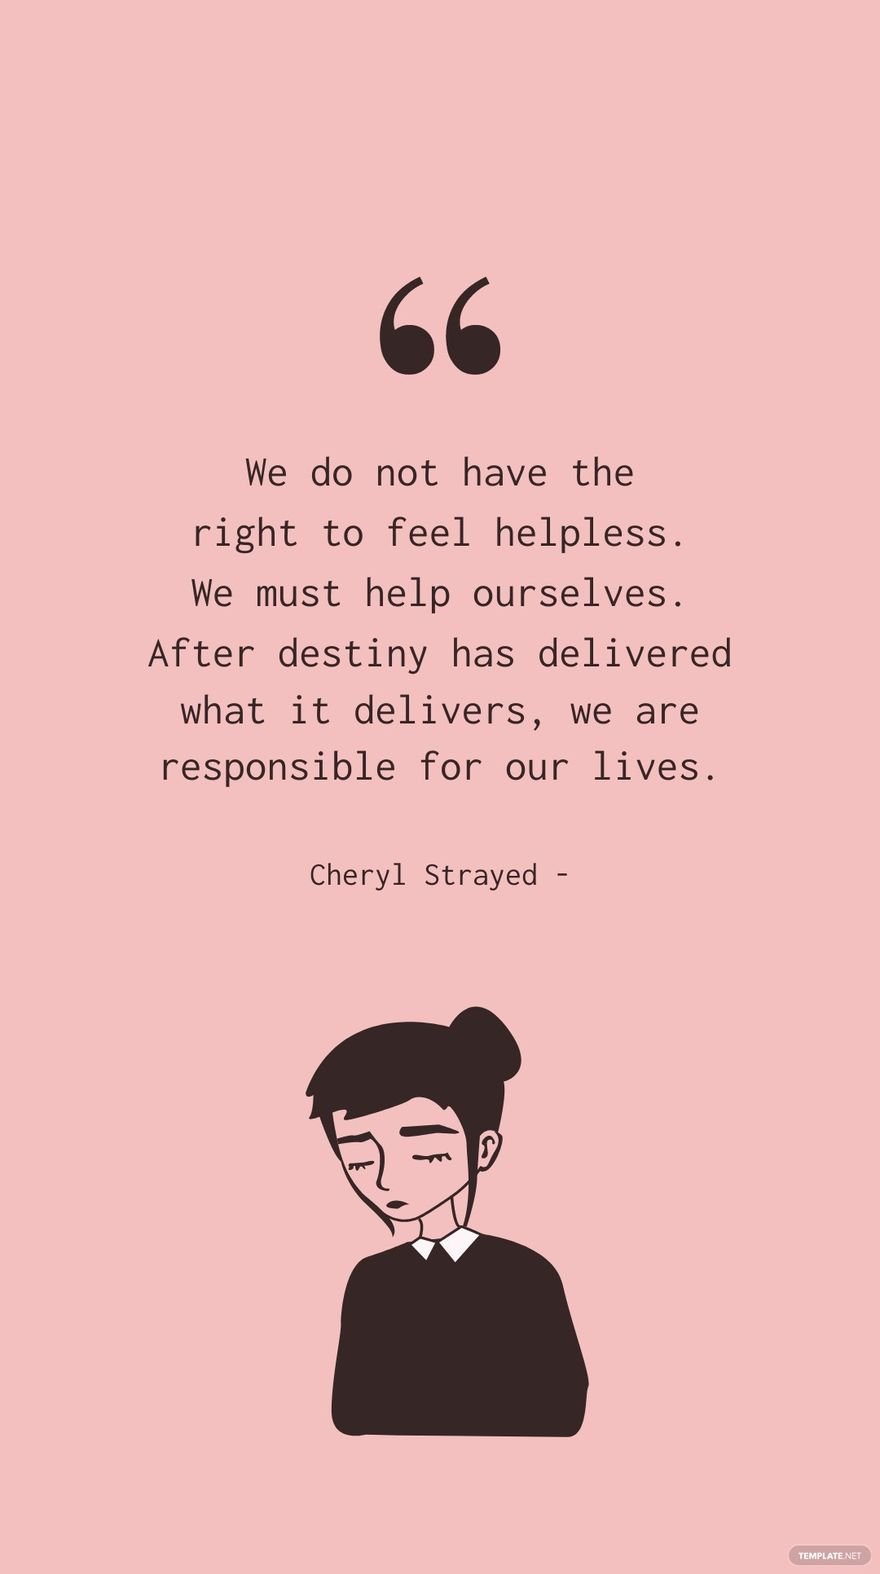 Cheryl Strayed - We do not have the right to feel helpless. We must help ourselves. After destiny has delivered what it delivers, we are responsible for our lives.